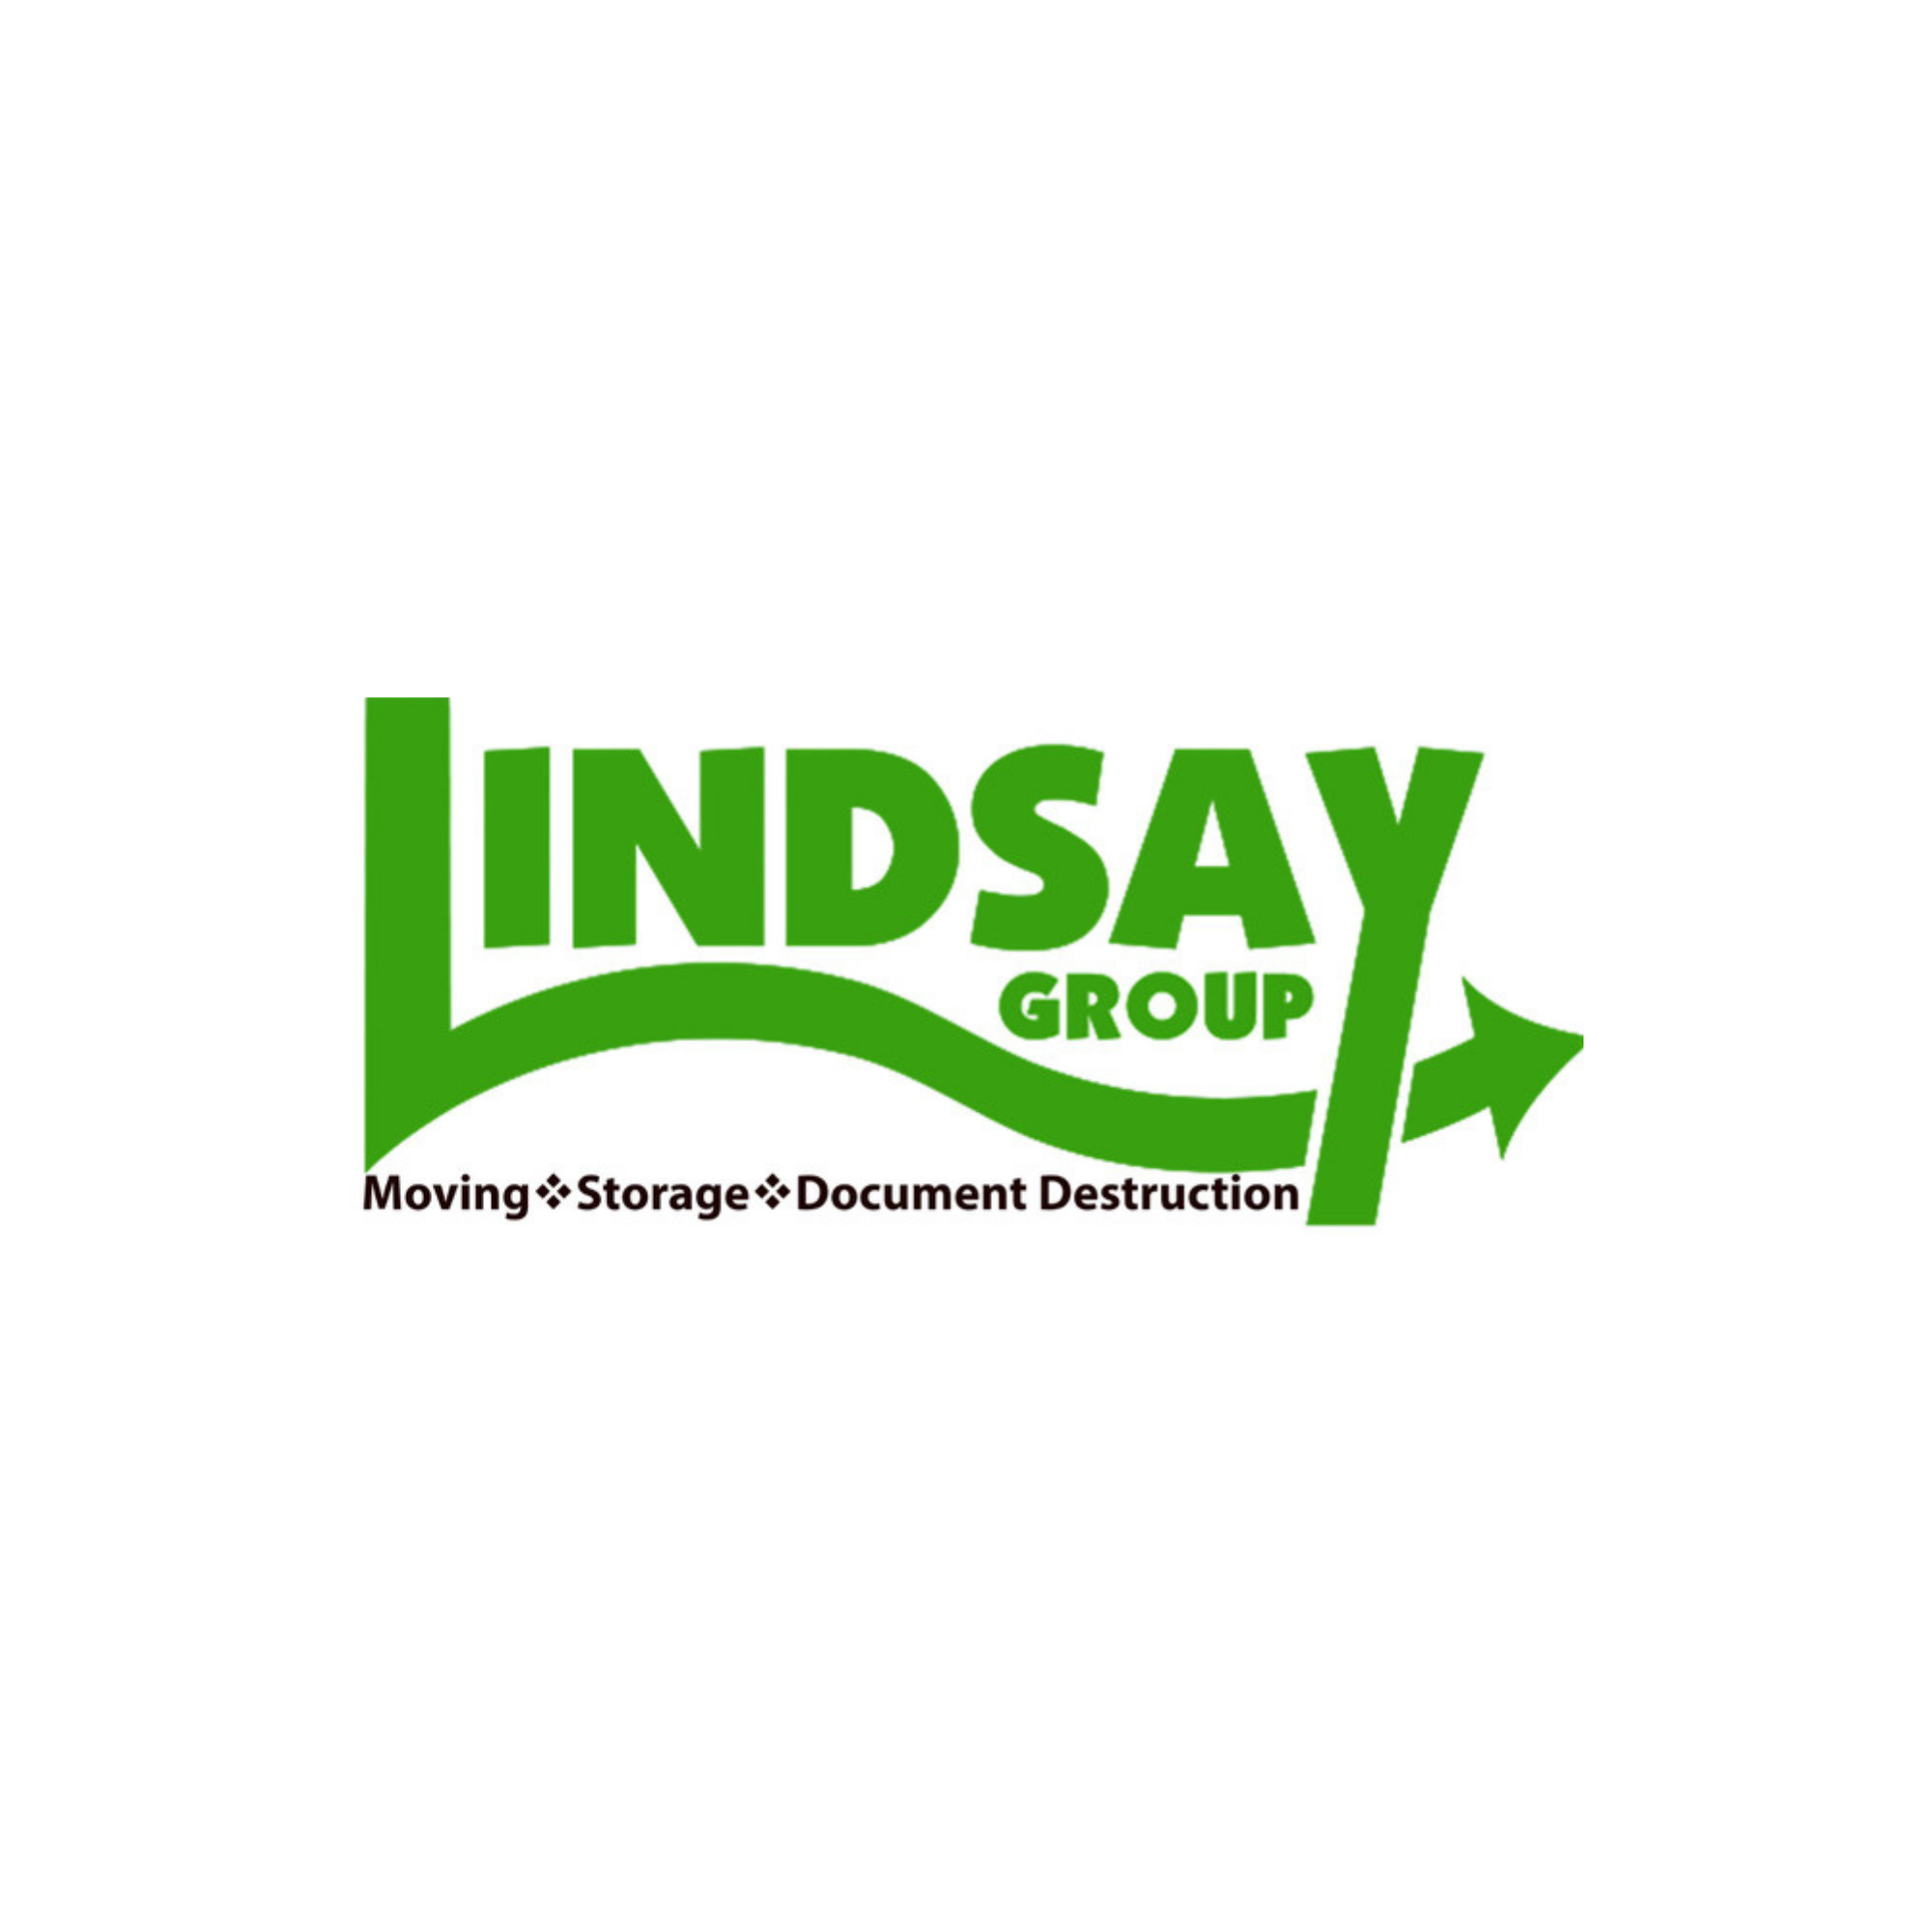 a green and black logo for lindsay group